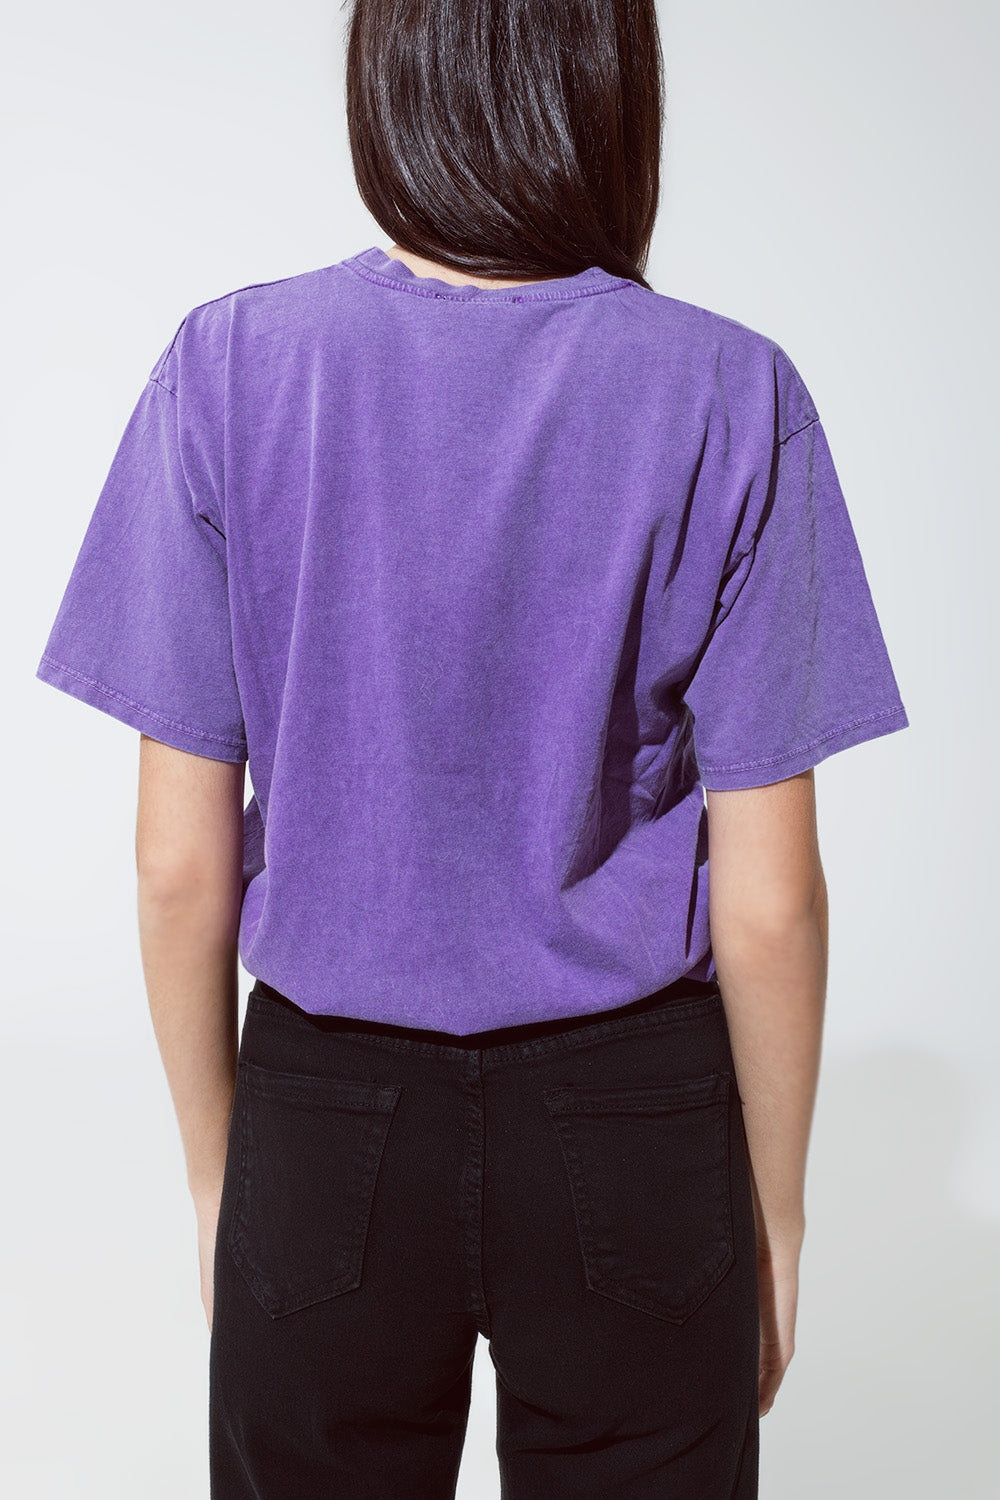 T-shirt relaxed fit in viola lavato con logo london